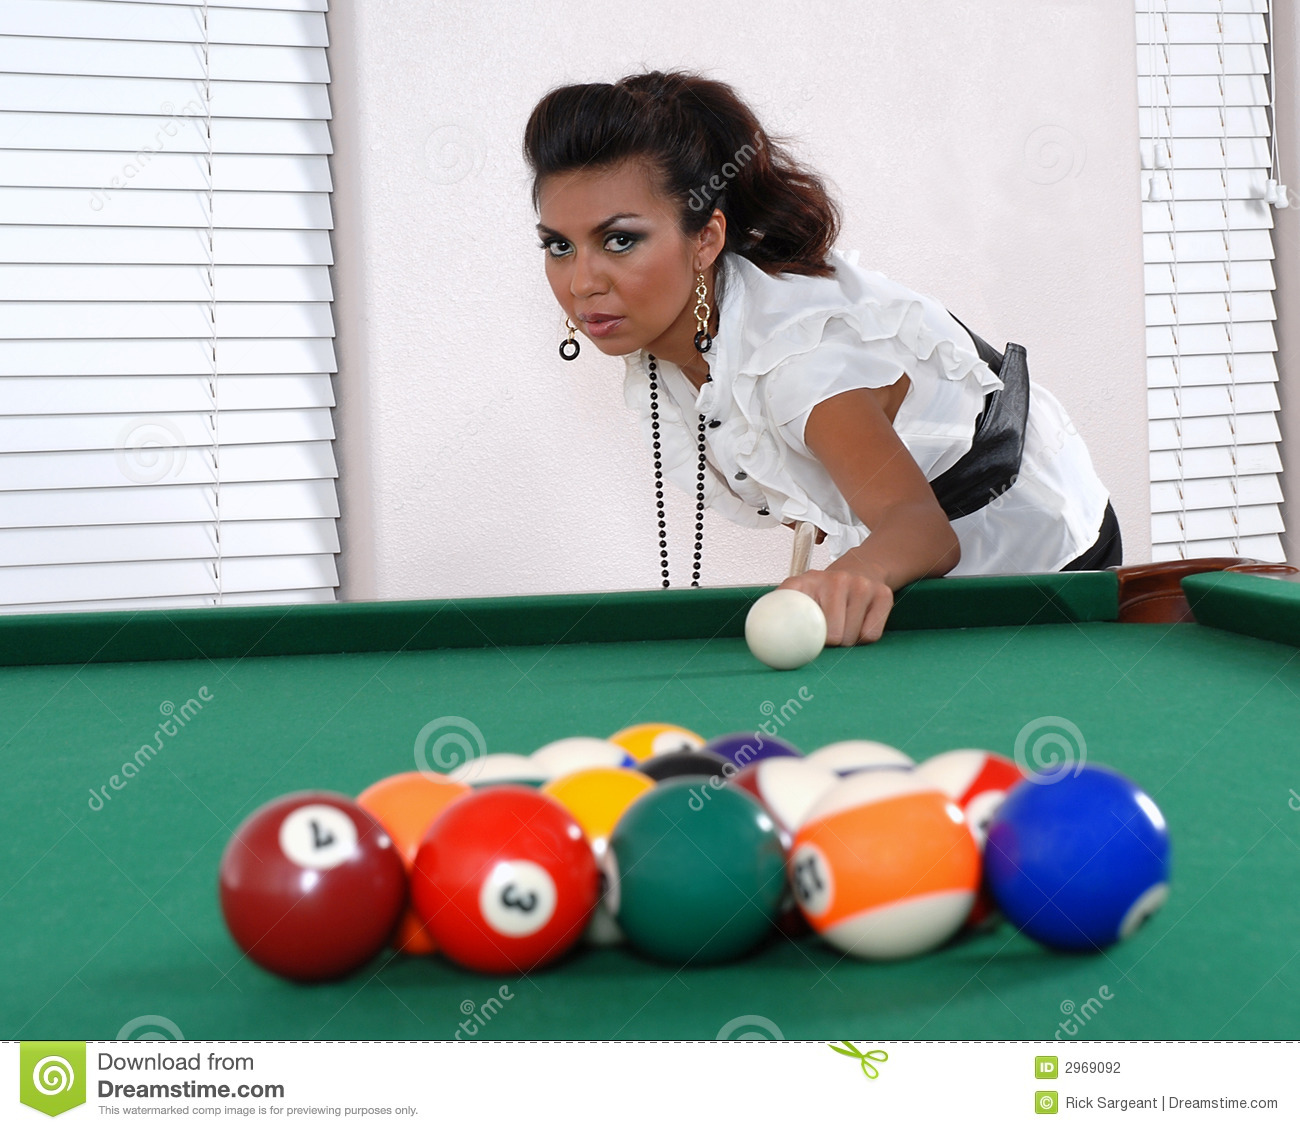 Female Pool Player Getting Ready To Break With Her First Shot   